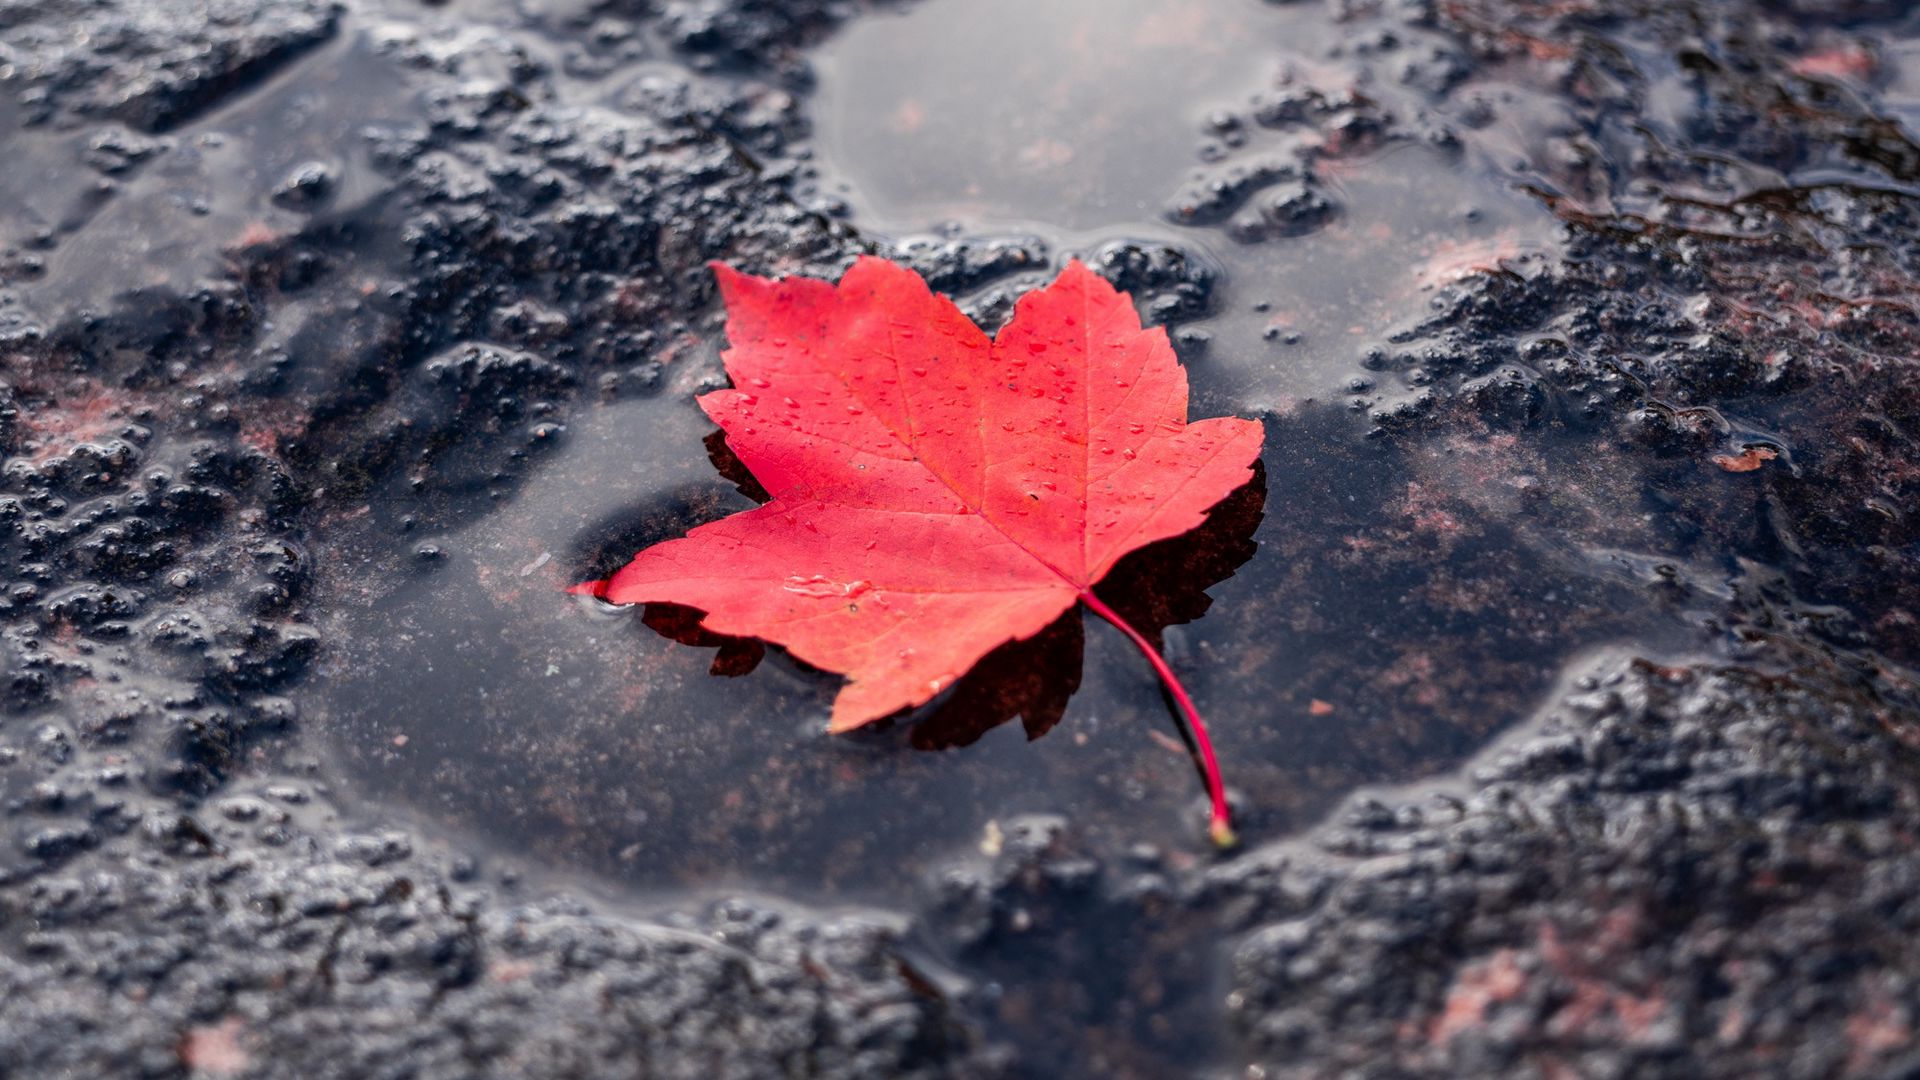 Download wallpaper 1920x1080 leaf, red, puddle, maple, wet, after rain full  hd, hdtv, fhd, 1080p hd background